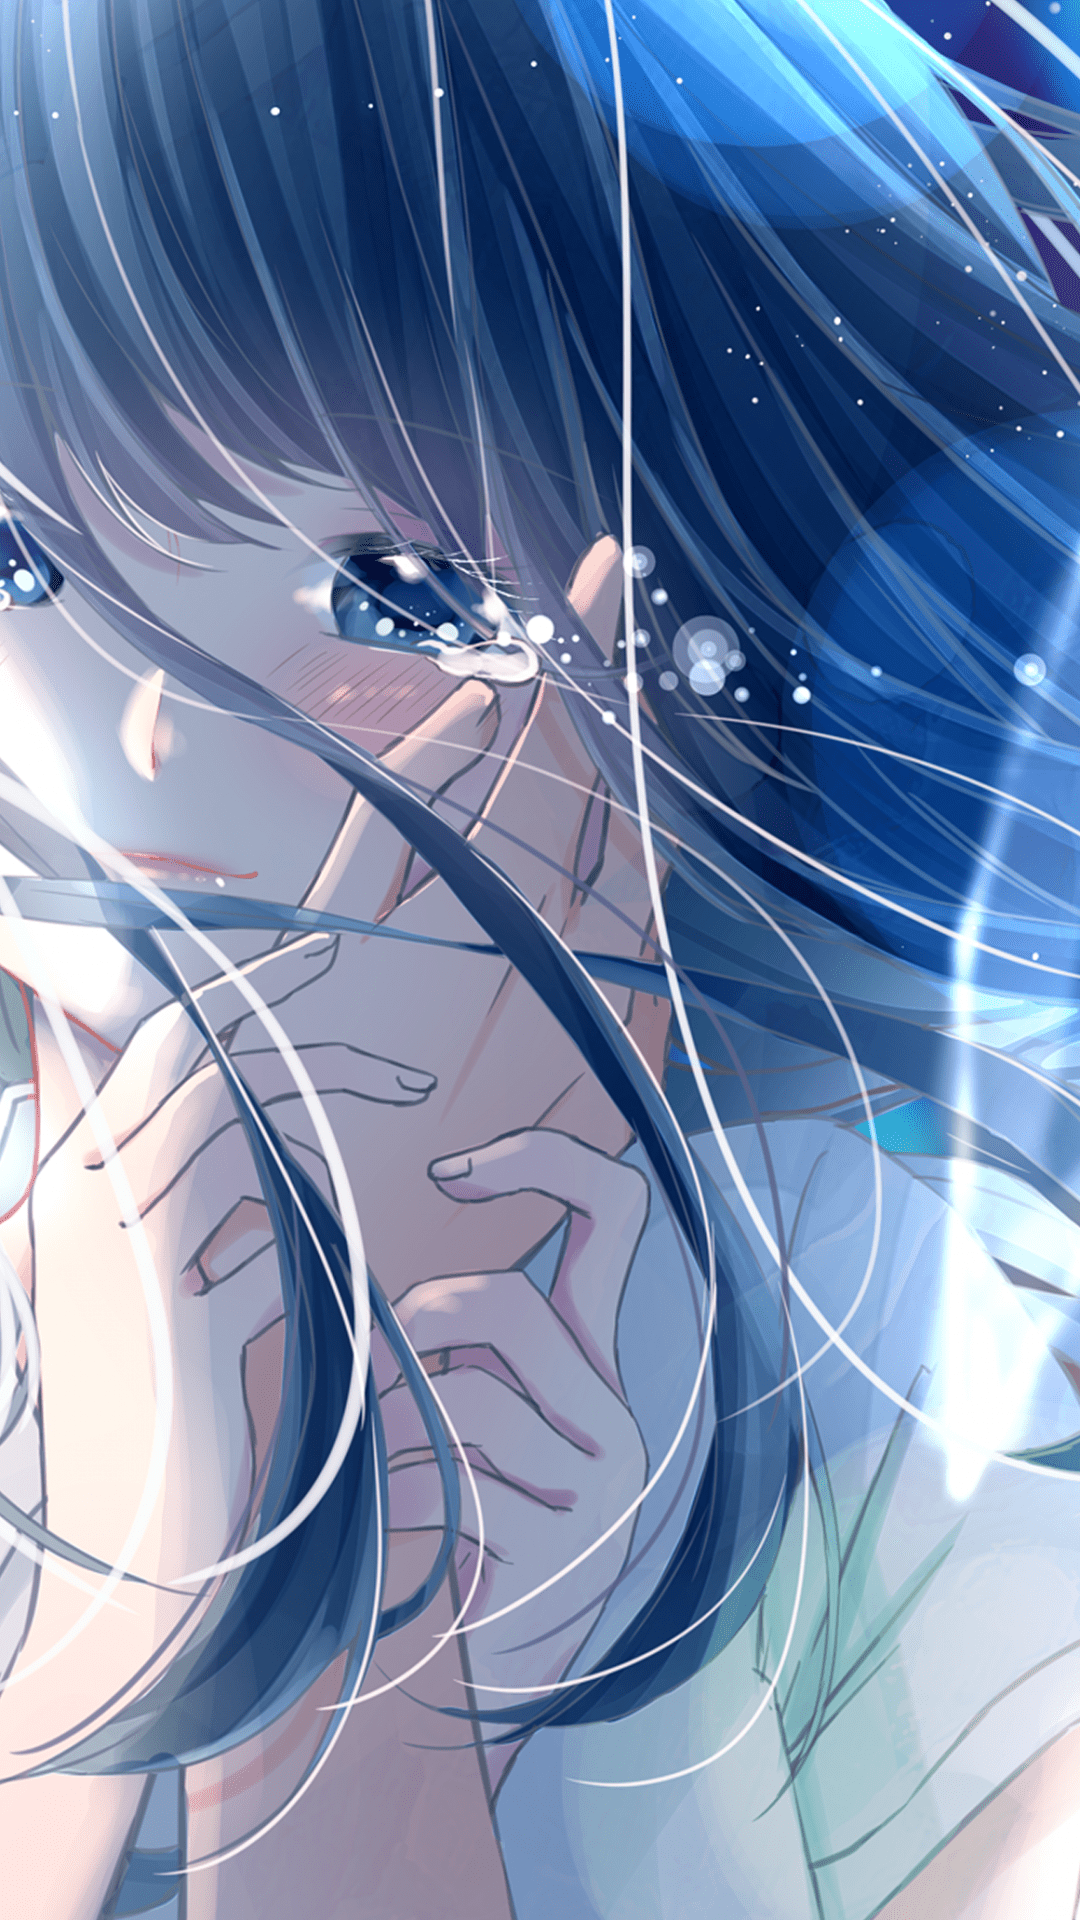 Crying Anime Wallpapers Top Free Crying Anime Backgrounds Wallpaperaccess